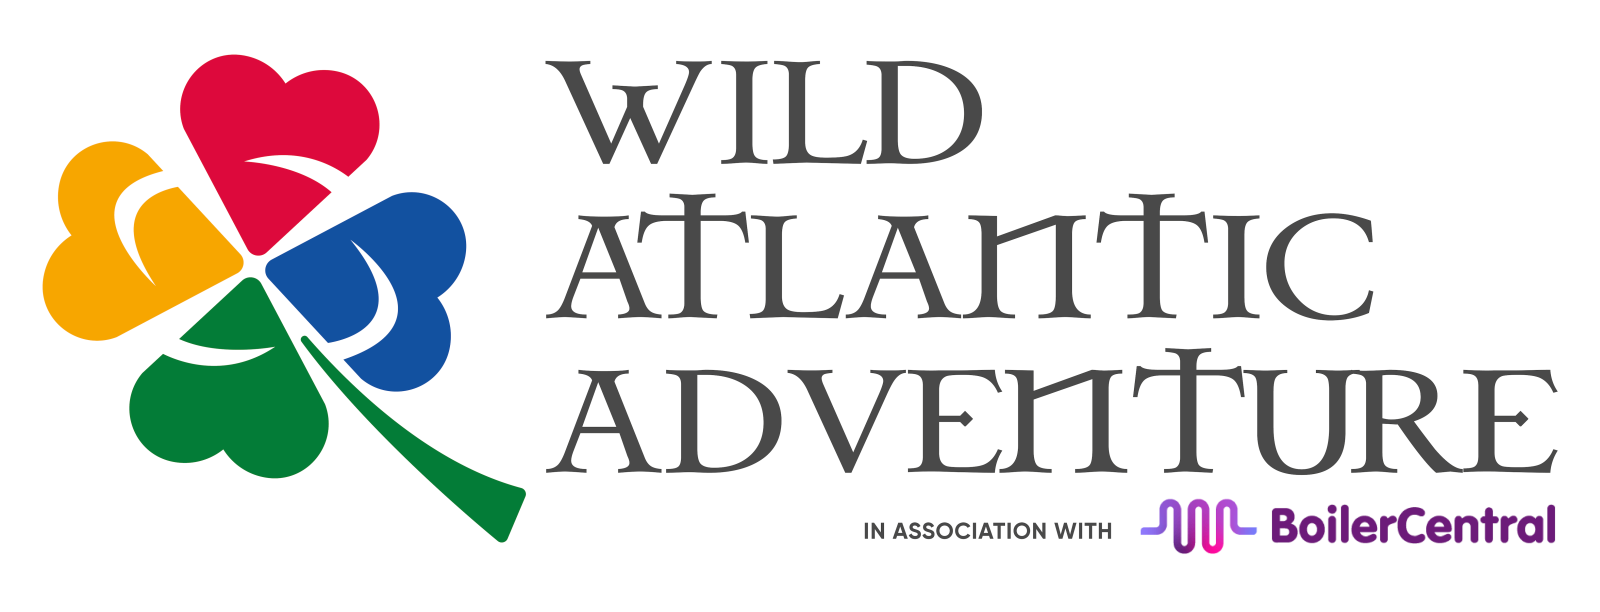 RL Cares teams up with Boiler Central on the Wild Atlantic Adventure